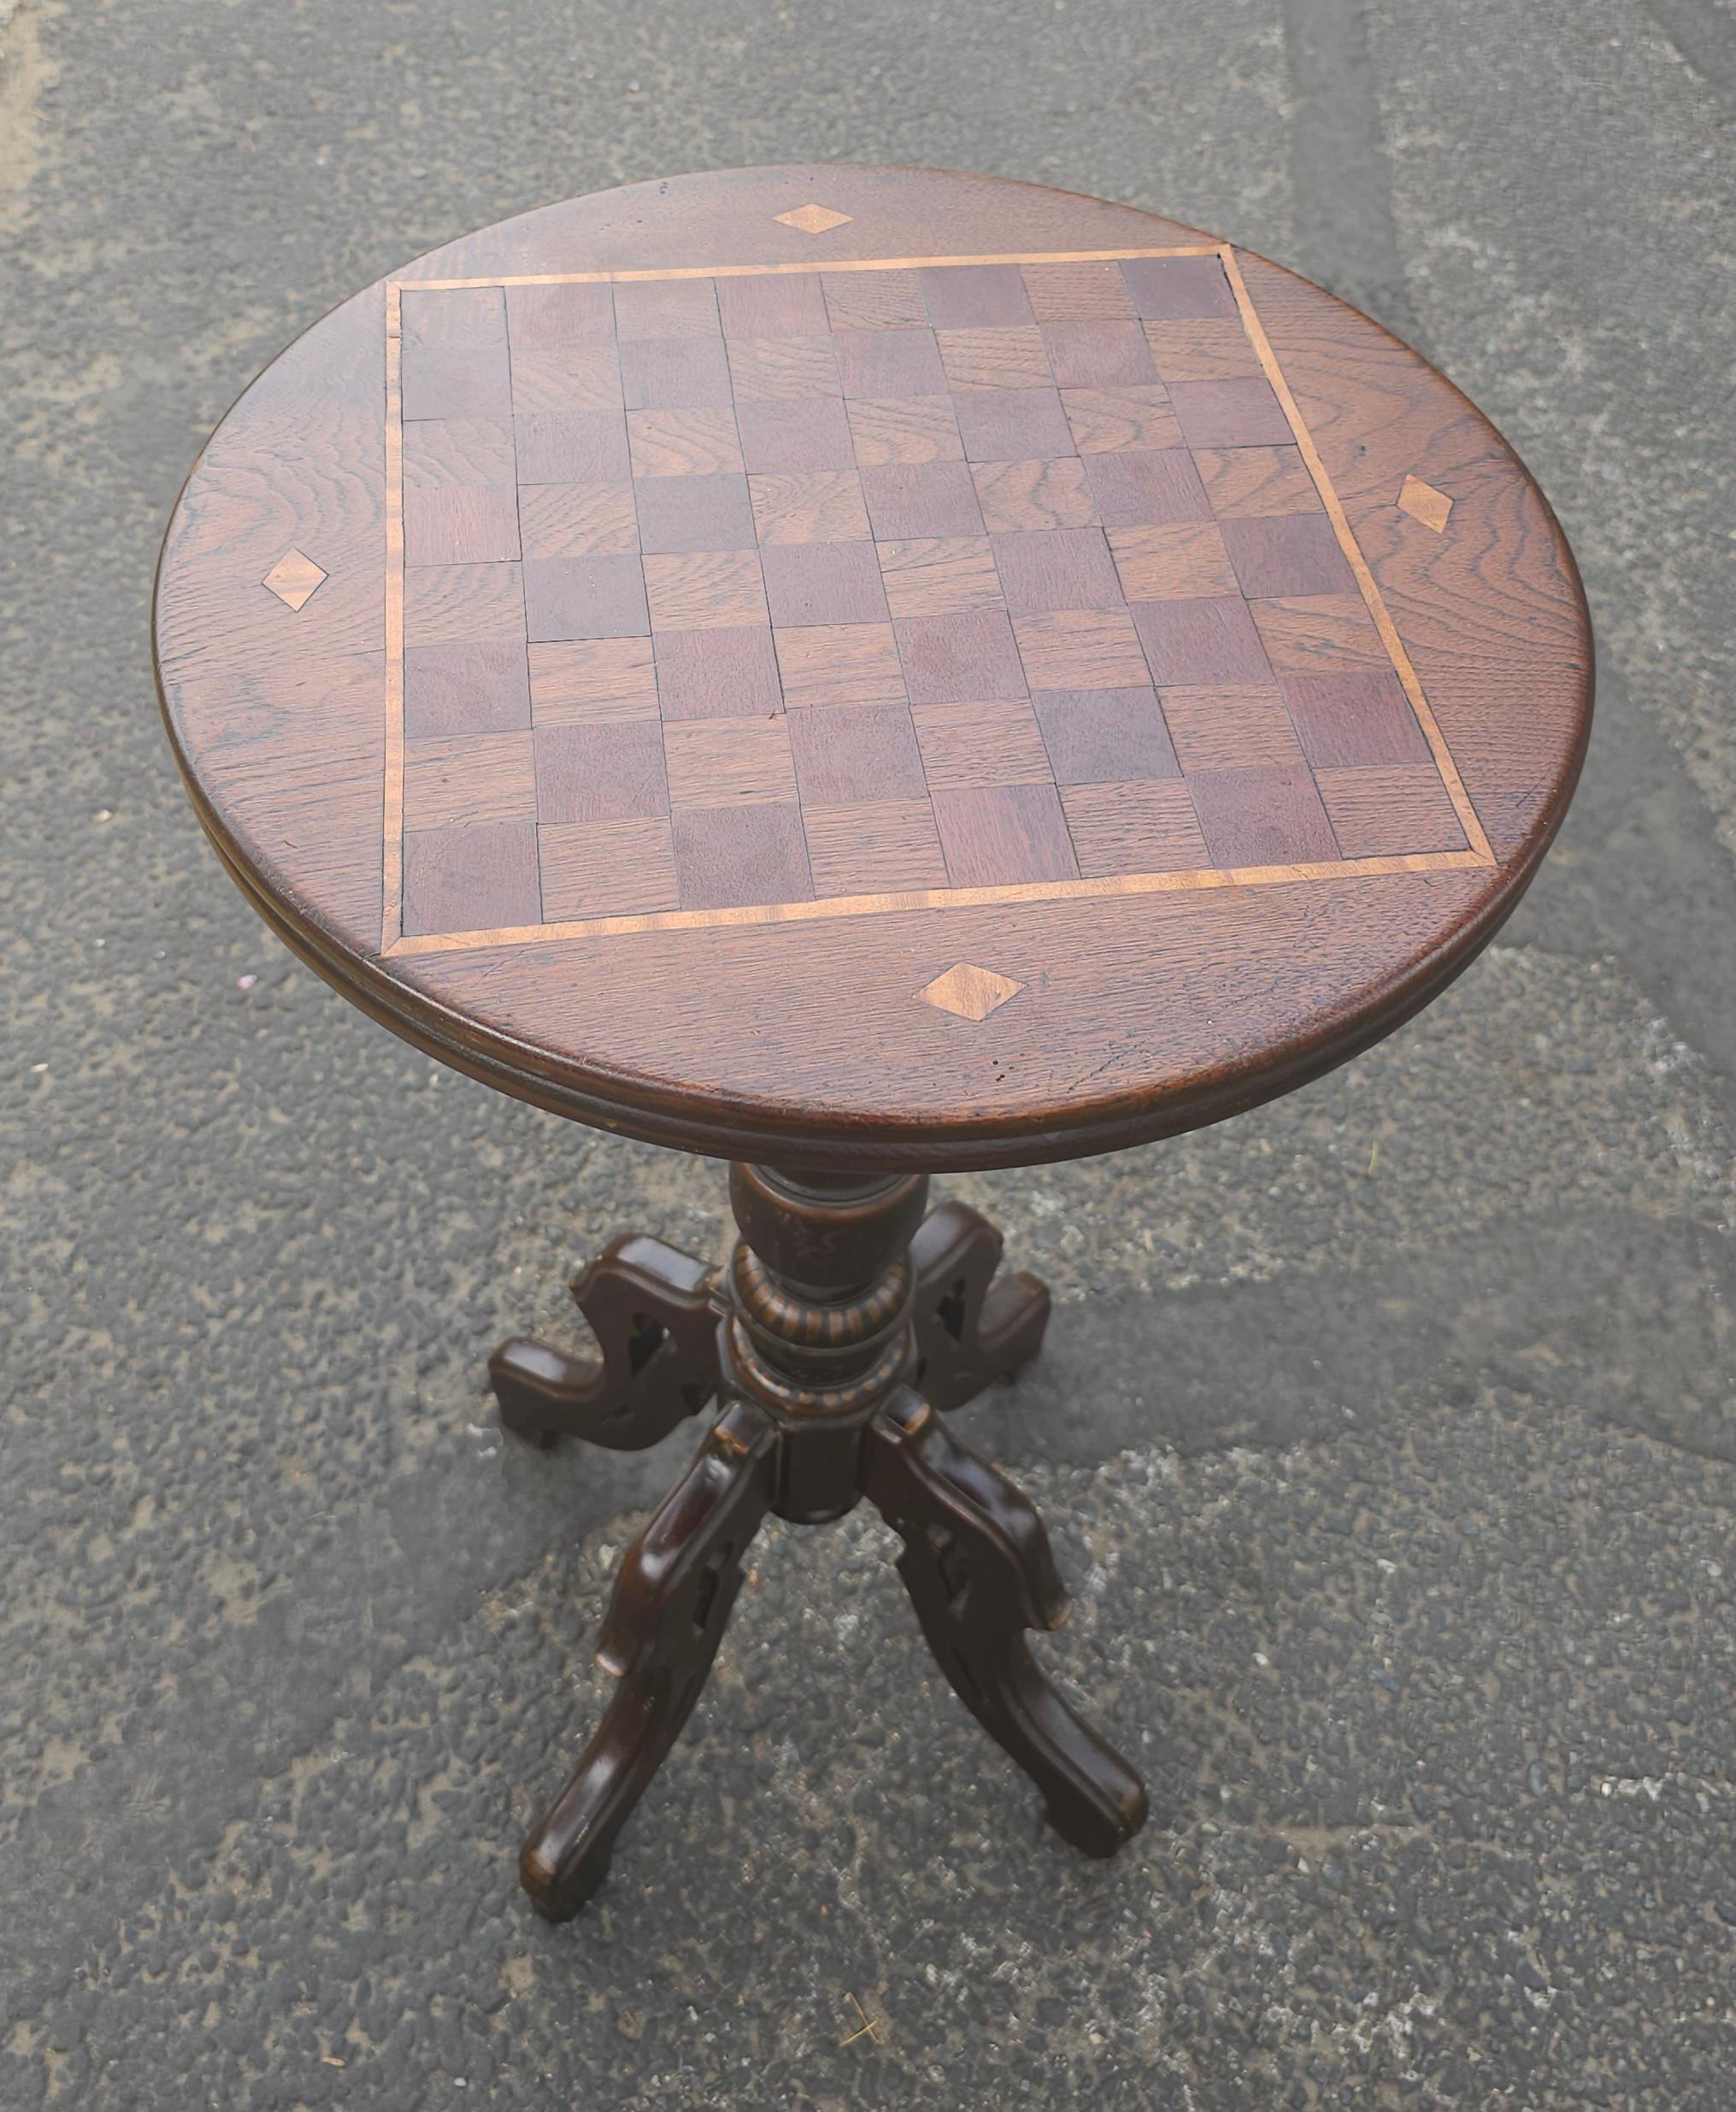 A 19th Century Victorian Oak and Mixed Wood Parquetry oak and walnut and Satinwood Inlay Pedestal Game Table
 Measures 18